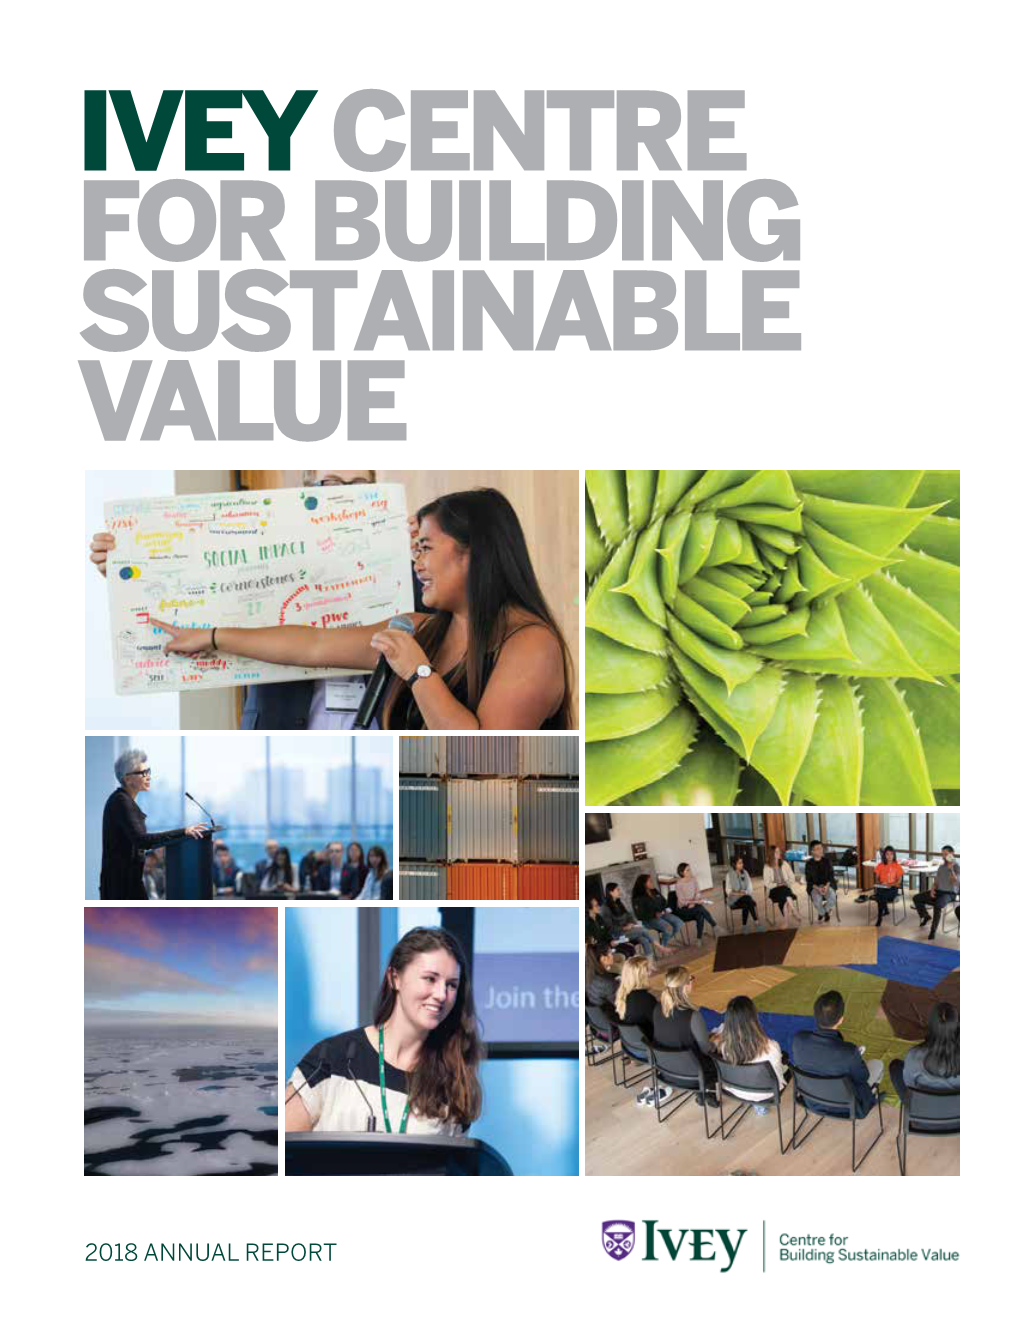 Iveycentre for Building Sustainable Value